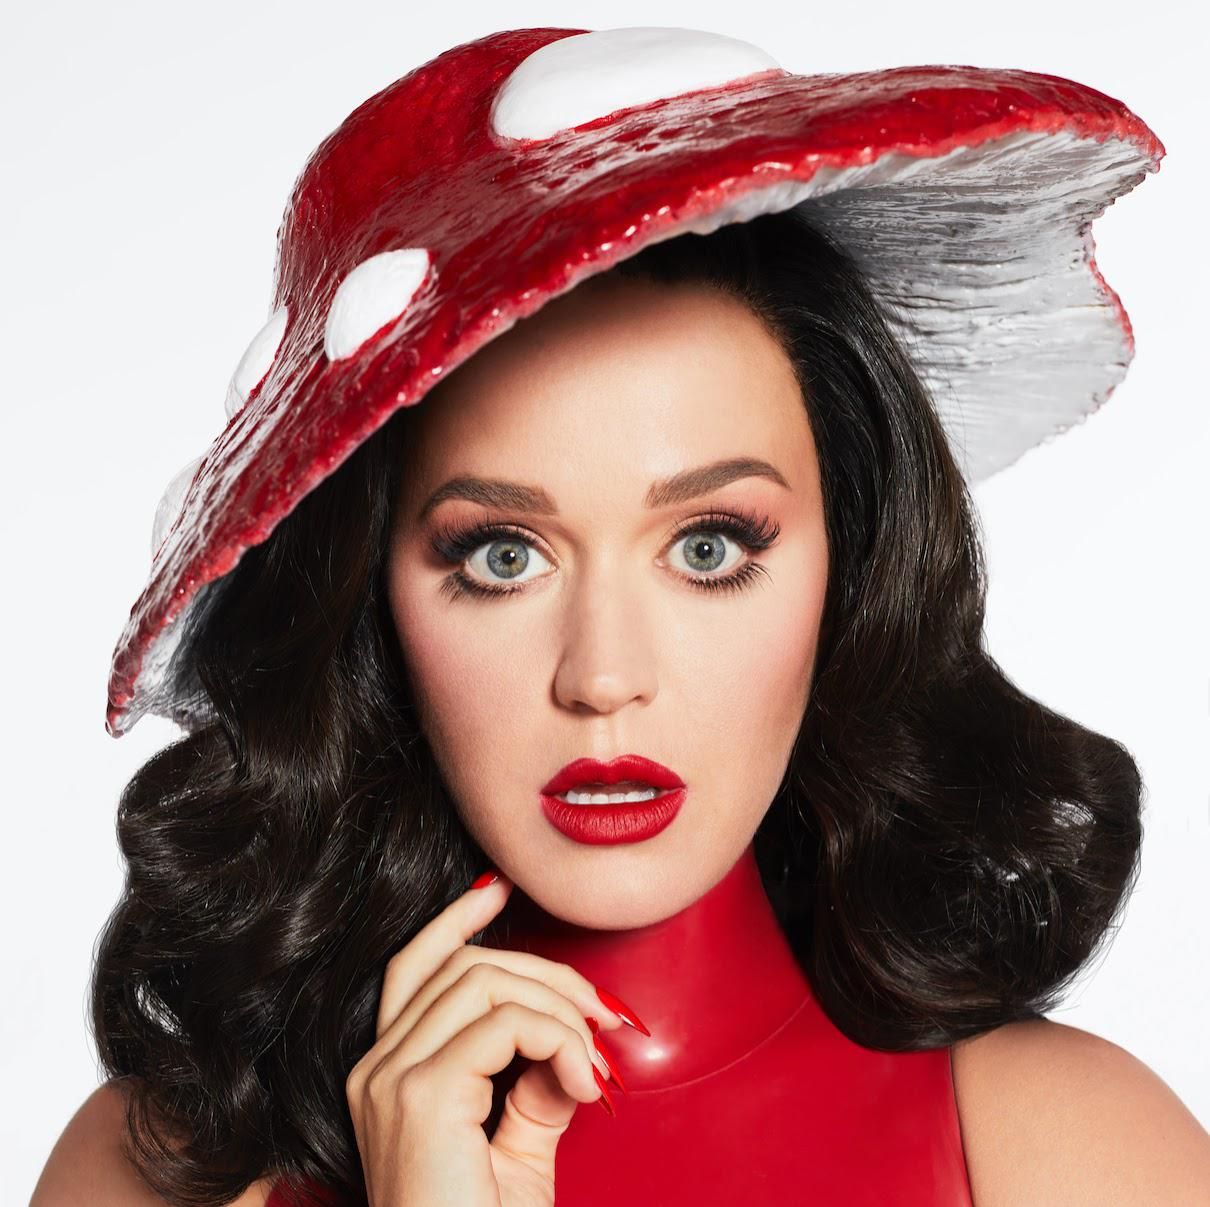 Katy perry hot and cold horse goat remix - vseradealer